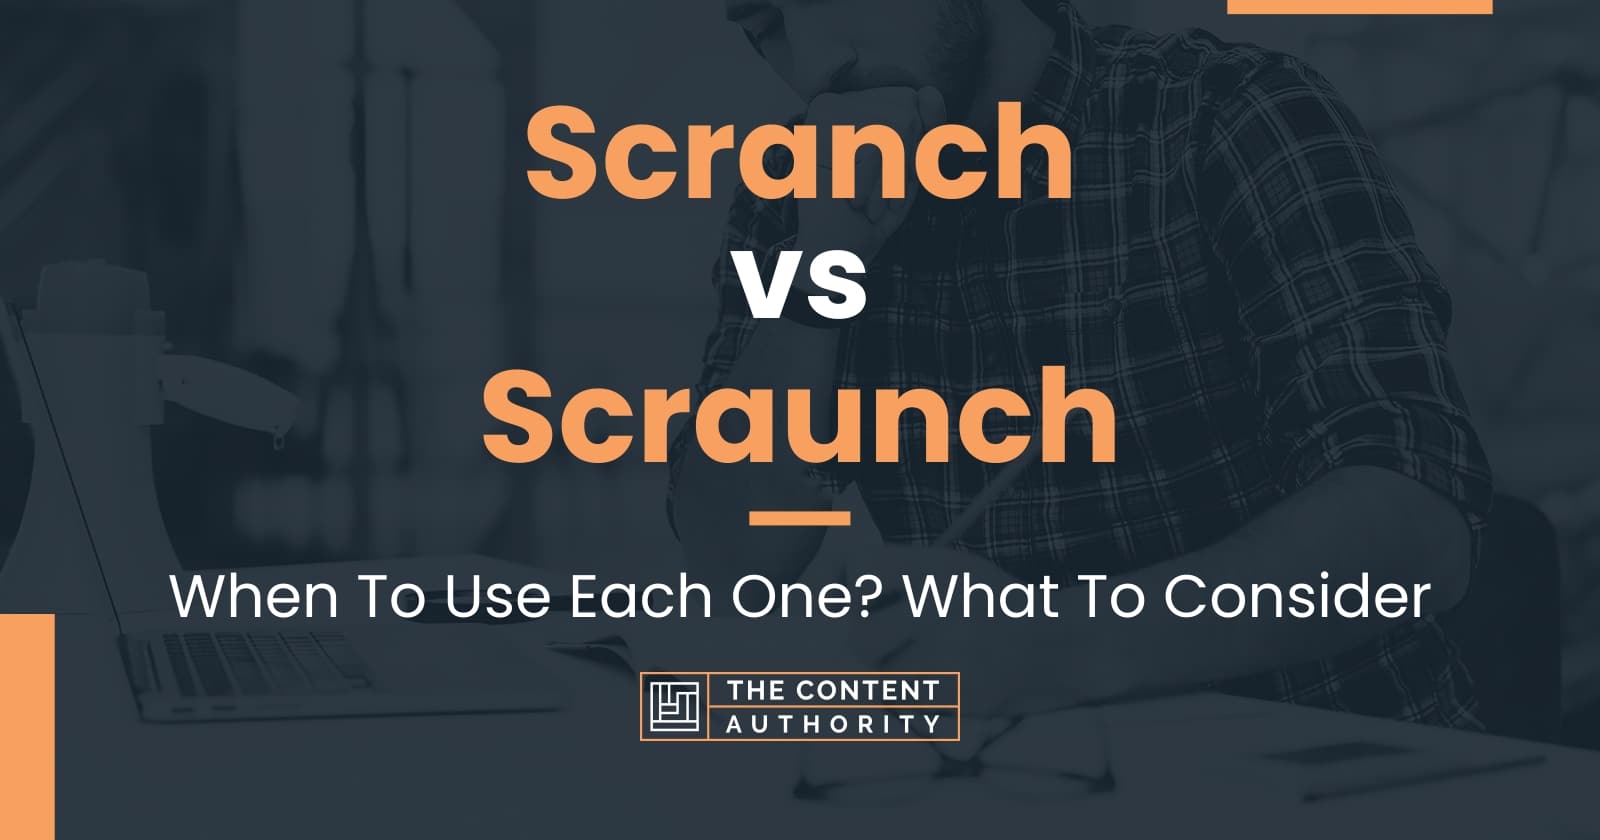 Scranch vs Scraunch: When To Use Each One? What To Consider